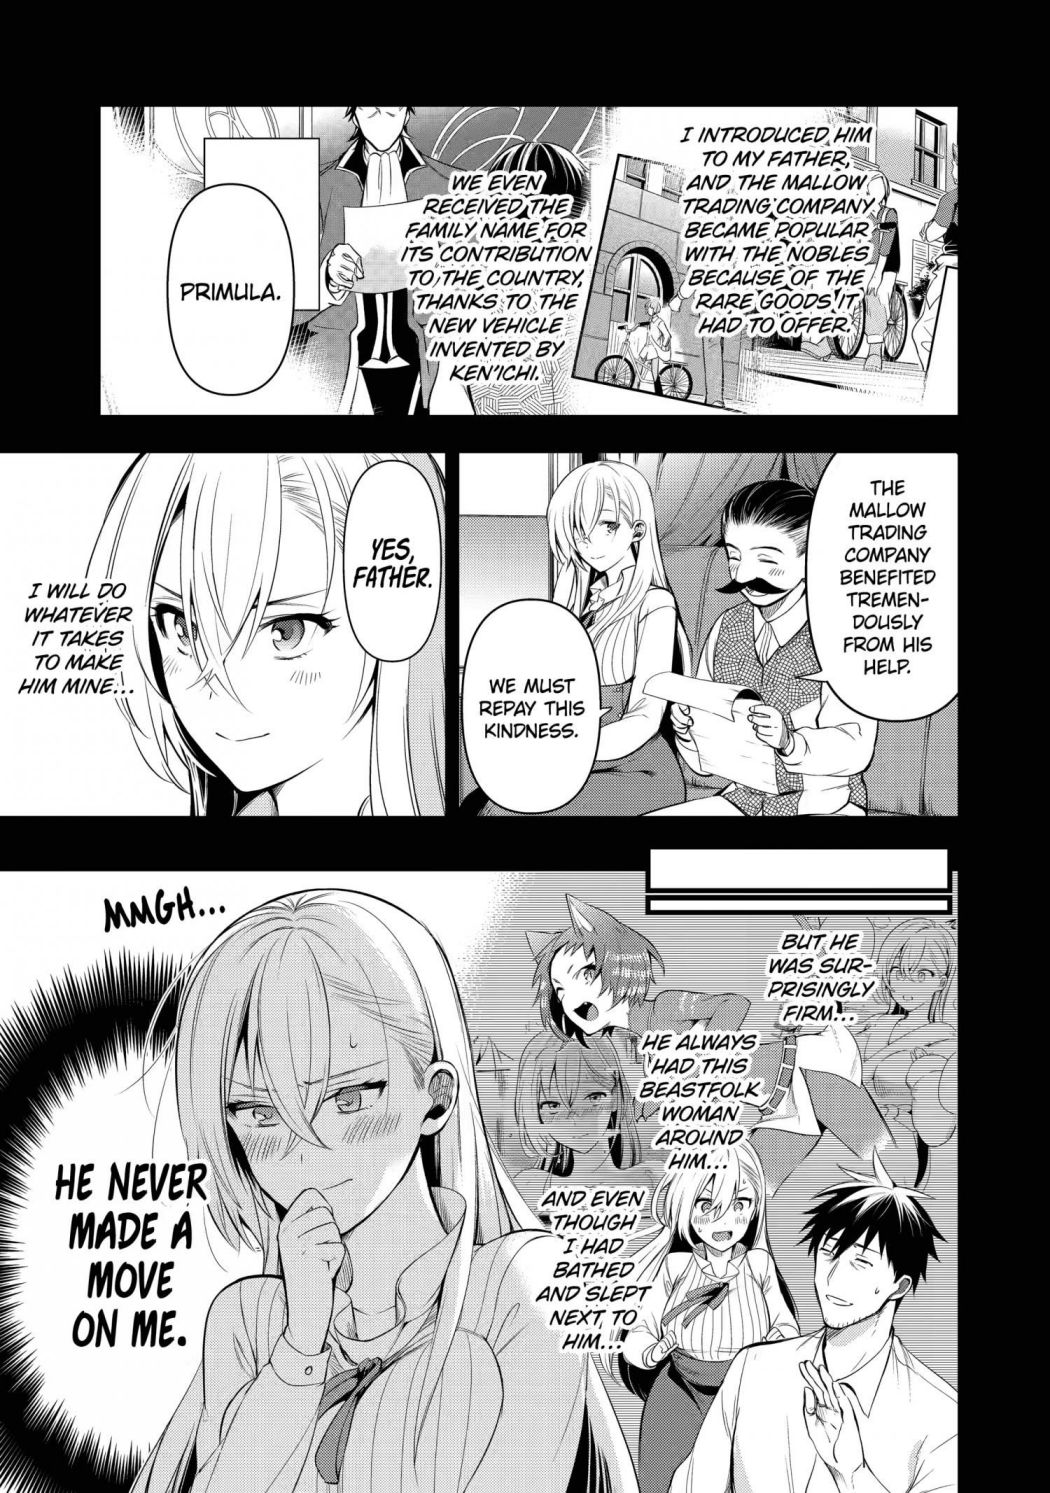 The Mail Order Life Of A Man Around 40 In Another World - Page 3